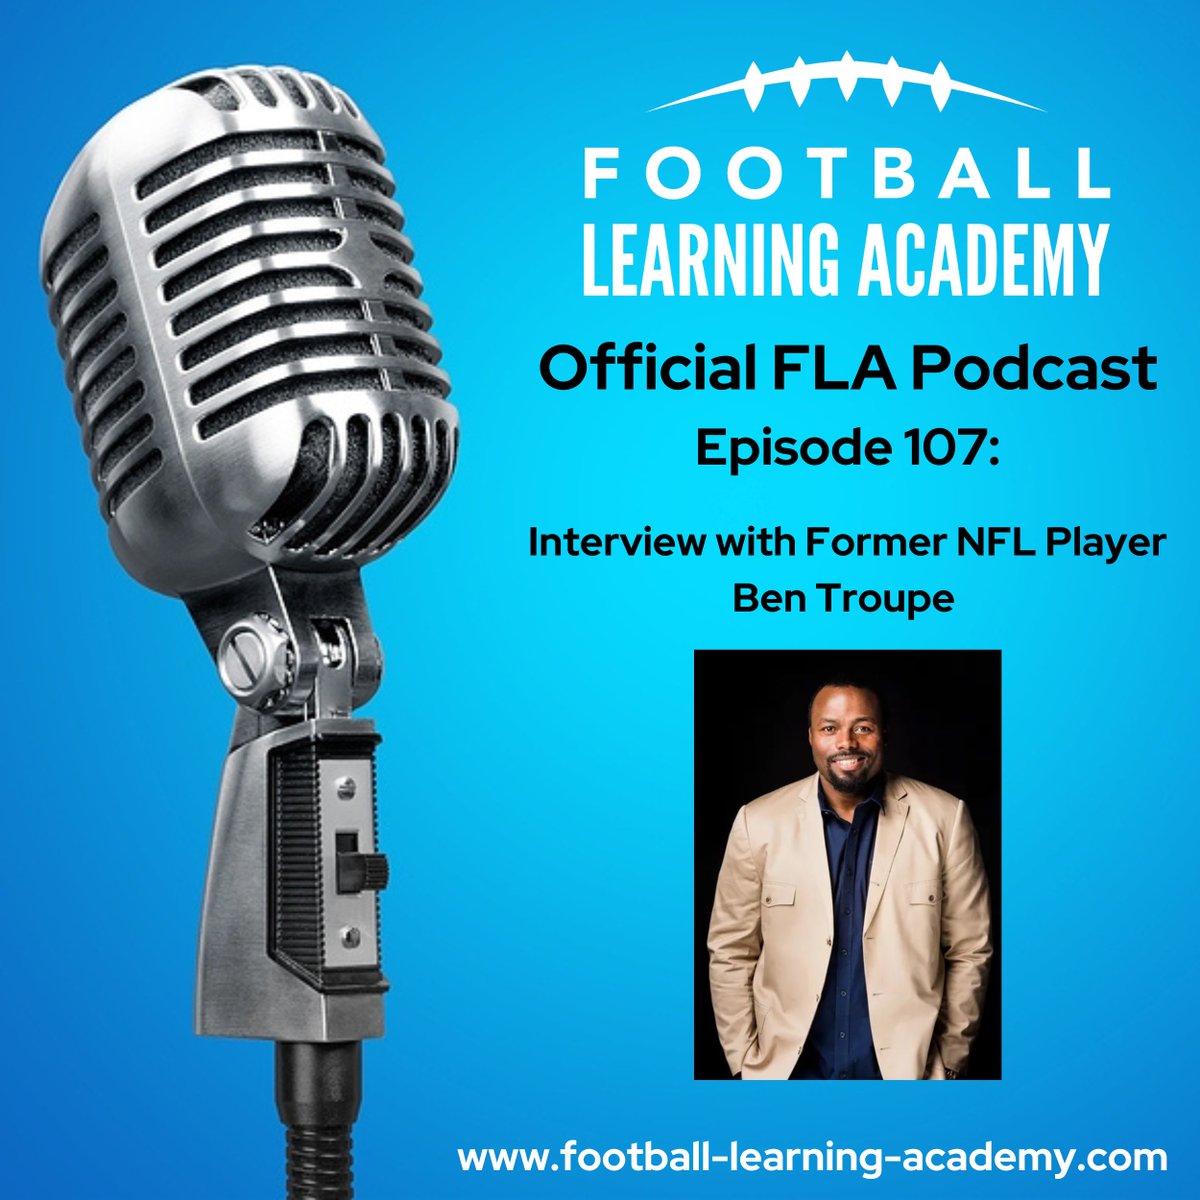 It’s always a fun time talking with FLA family member and former player, Ben Troupe. Ben has some great stories to share. You’re not going to want to miss this episode! Link in bio.